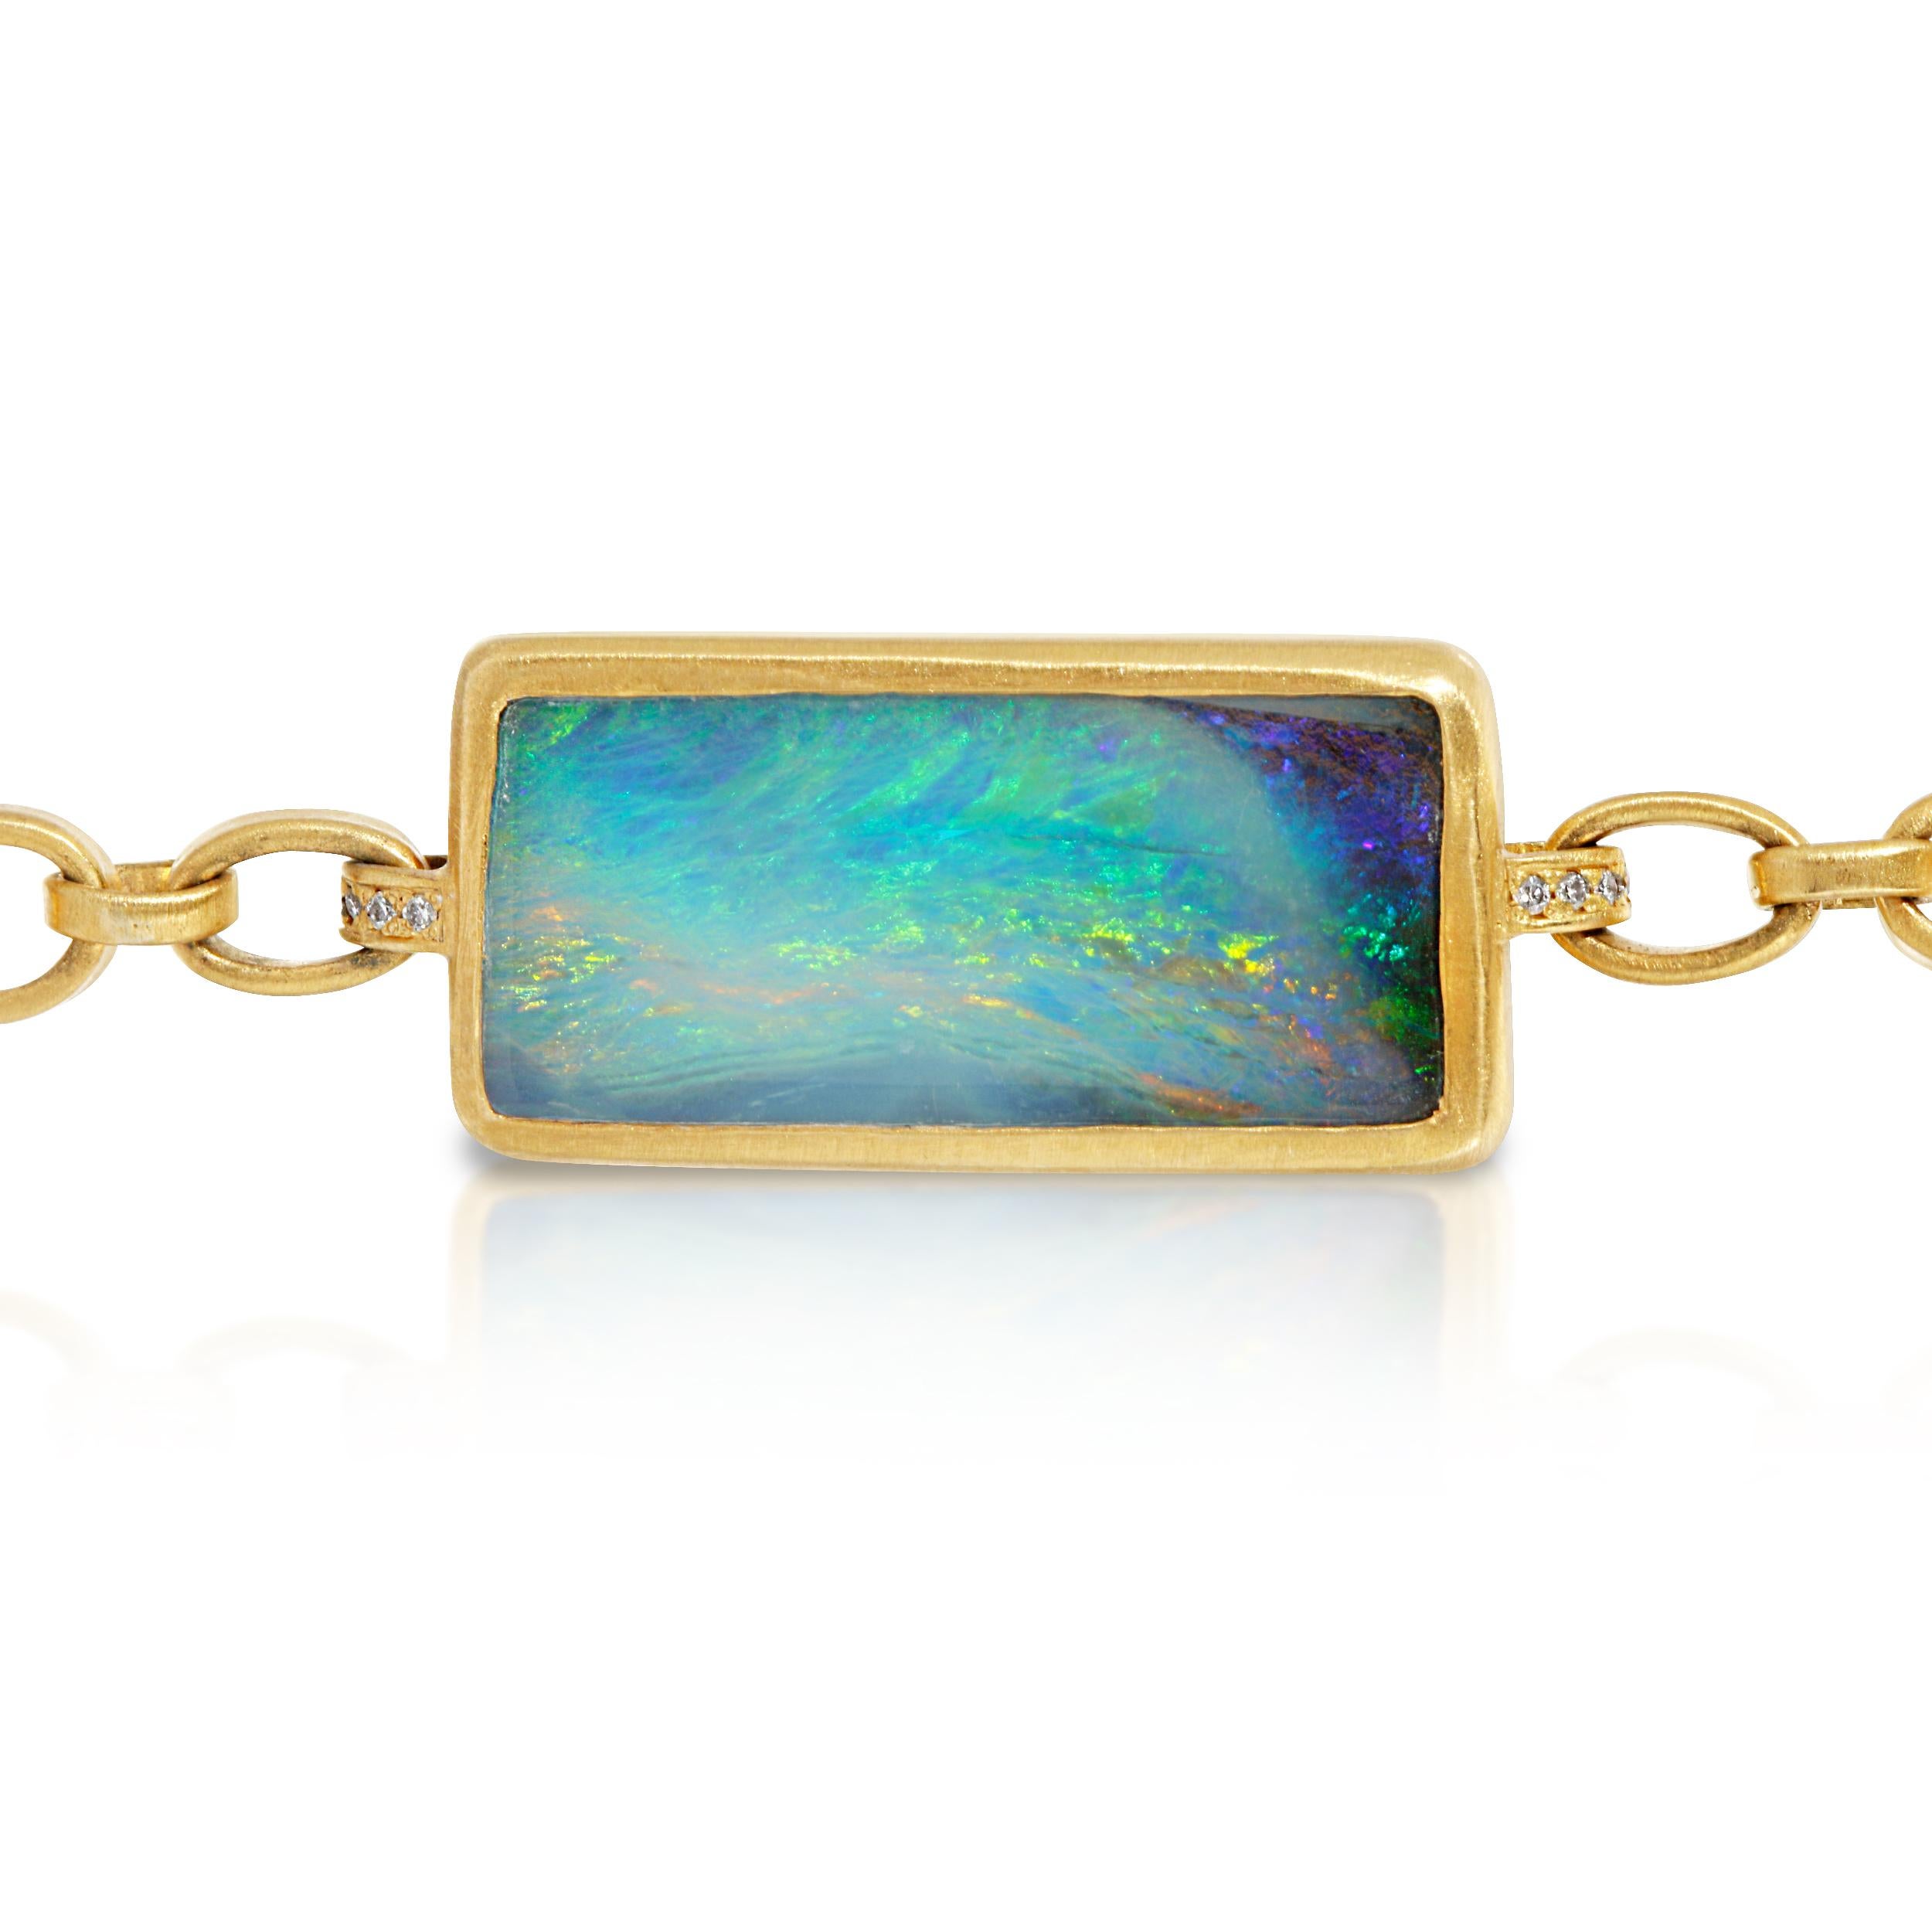 This 10.20ct Australian Opal Bracelet is Bezel set in 18k Matte Yellow Gold with a 19g Handmade Chain and Handmade Toggle Clasp with Diamond accents on the tips.  The Opal is attached to the Chain link Bracelet with Diamond accented loops.  This